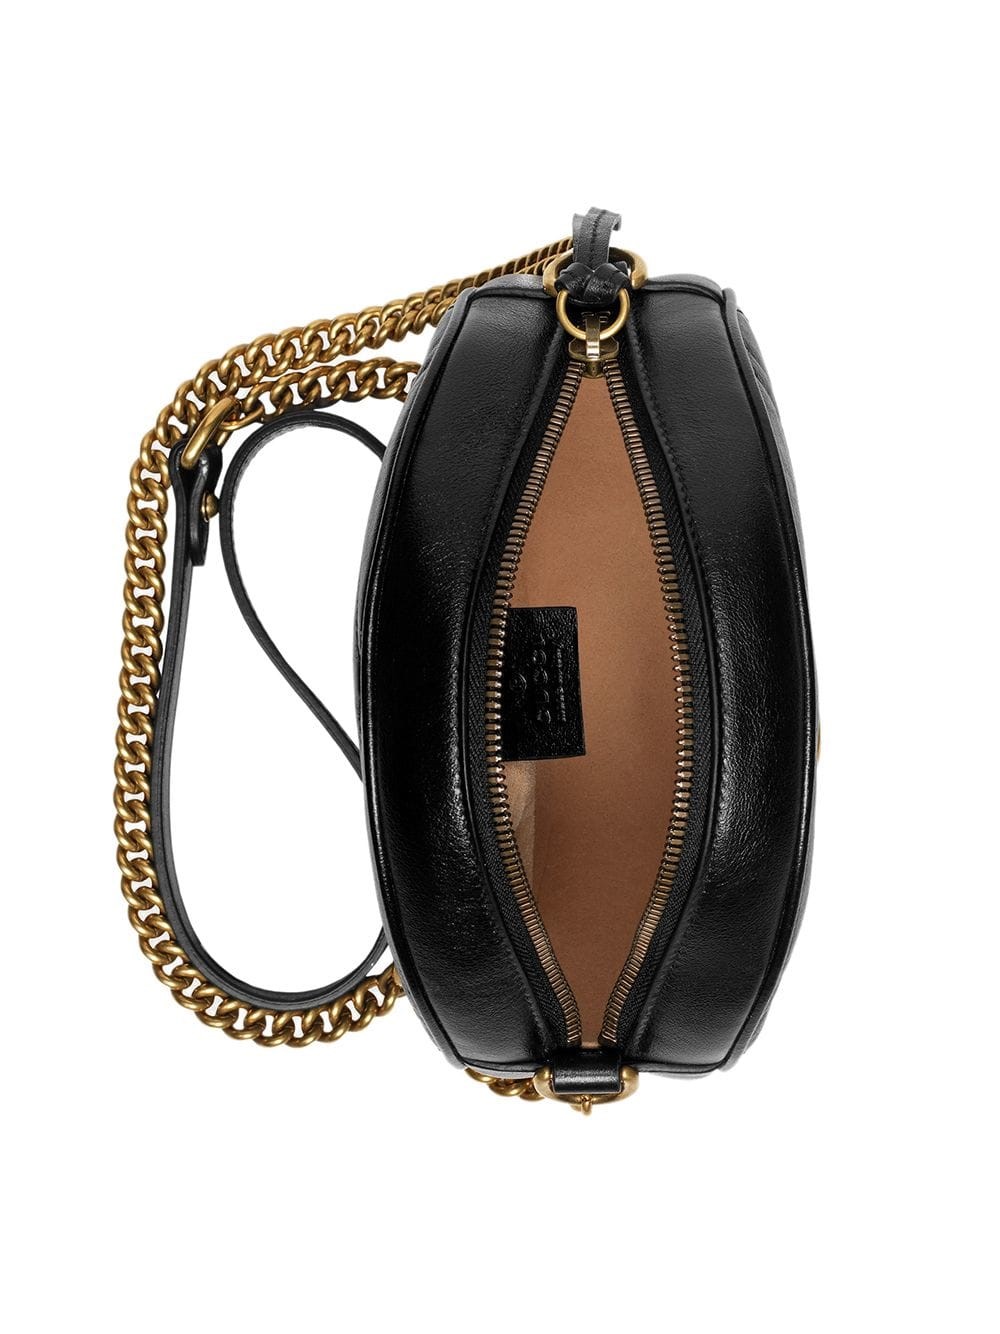 gucci GG MARMONT ROUND BAG available on www.bagssaleusa.com/product-category/neverfull-bag/ - 27417